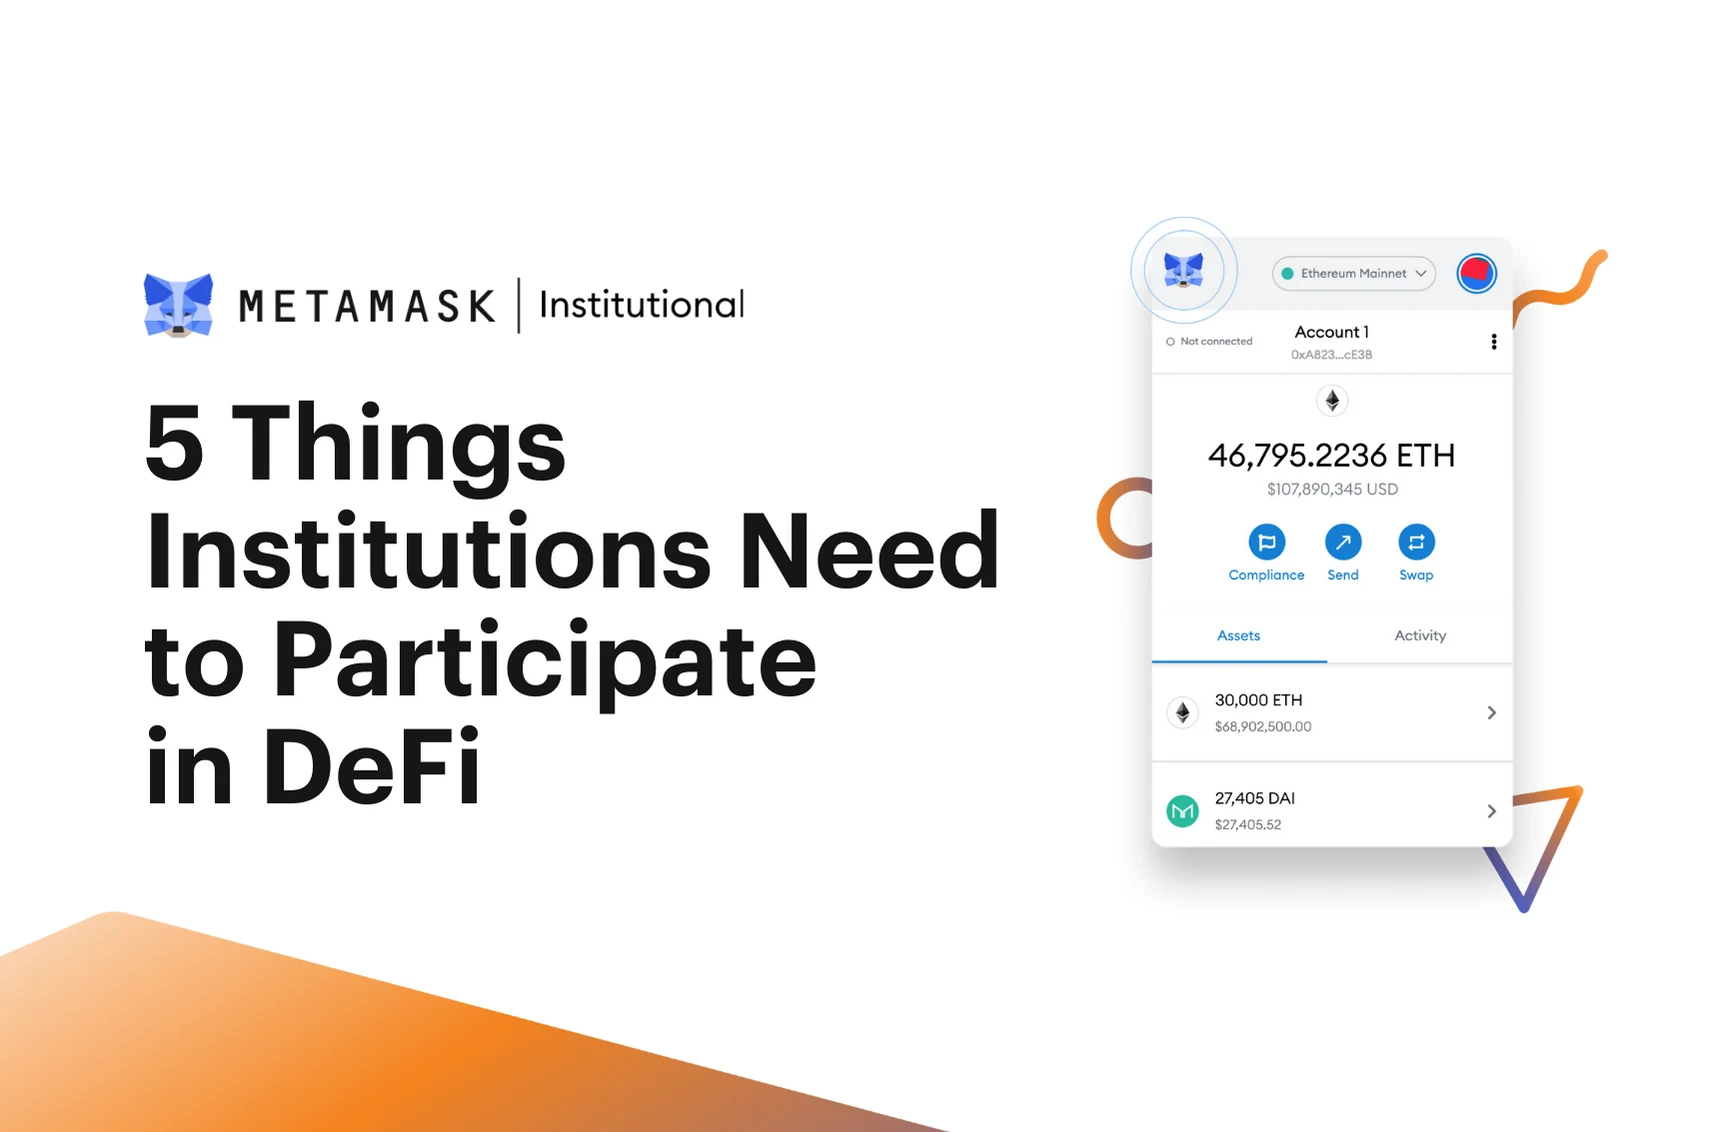 Image: 5 Things Institutions Need to Participate in DeFi